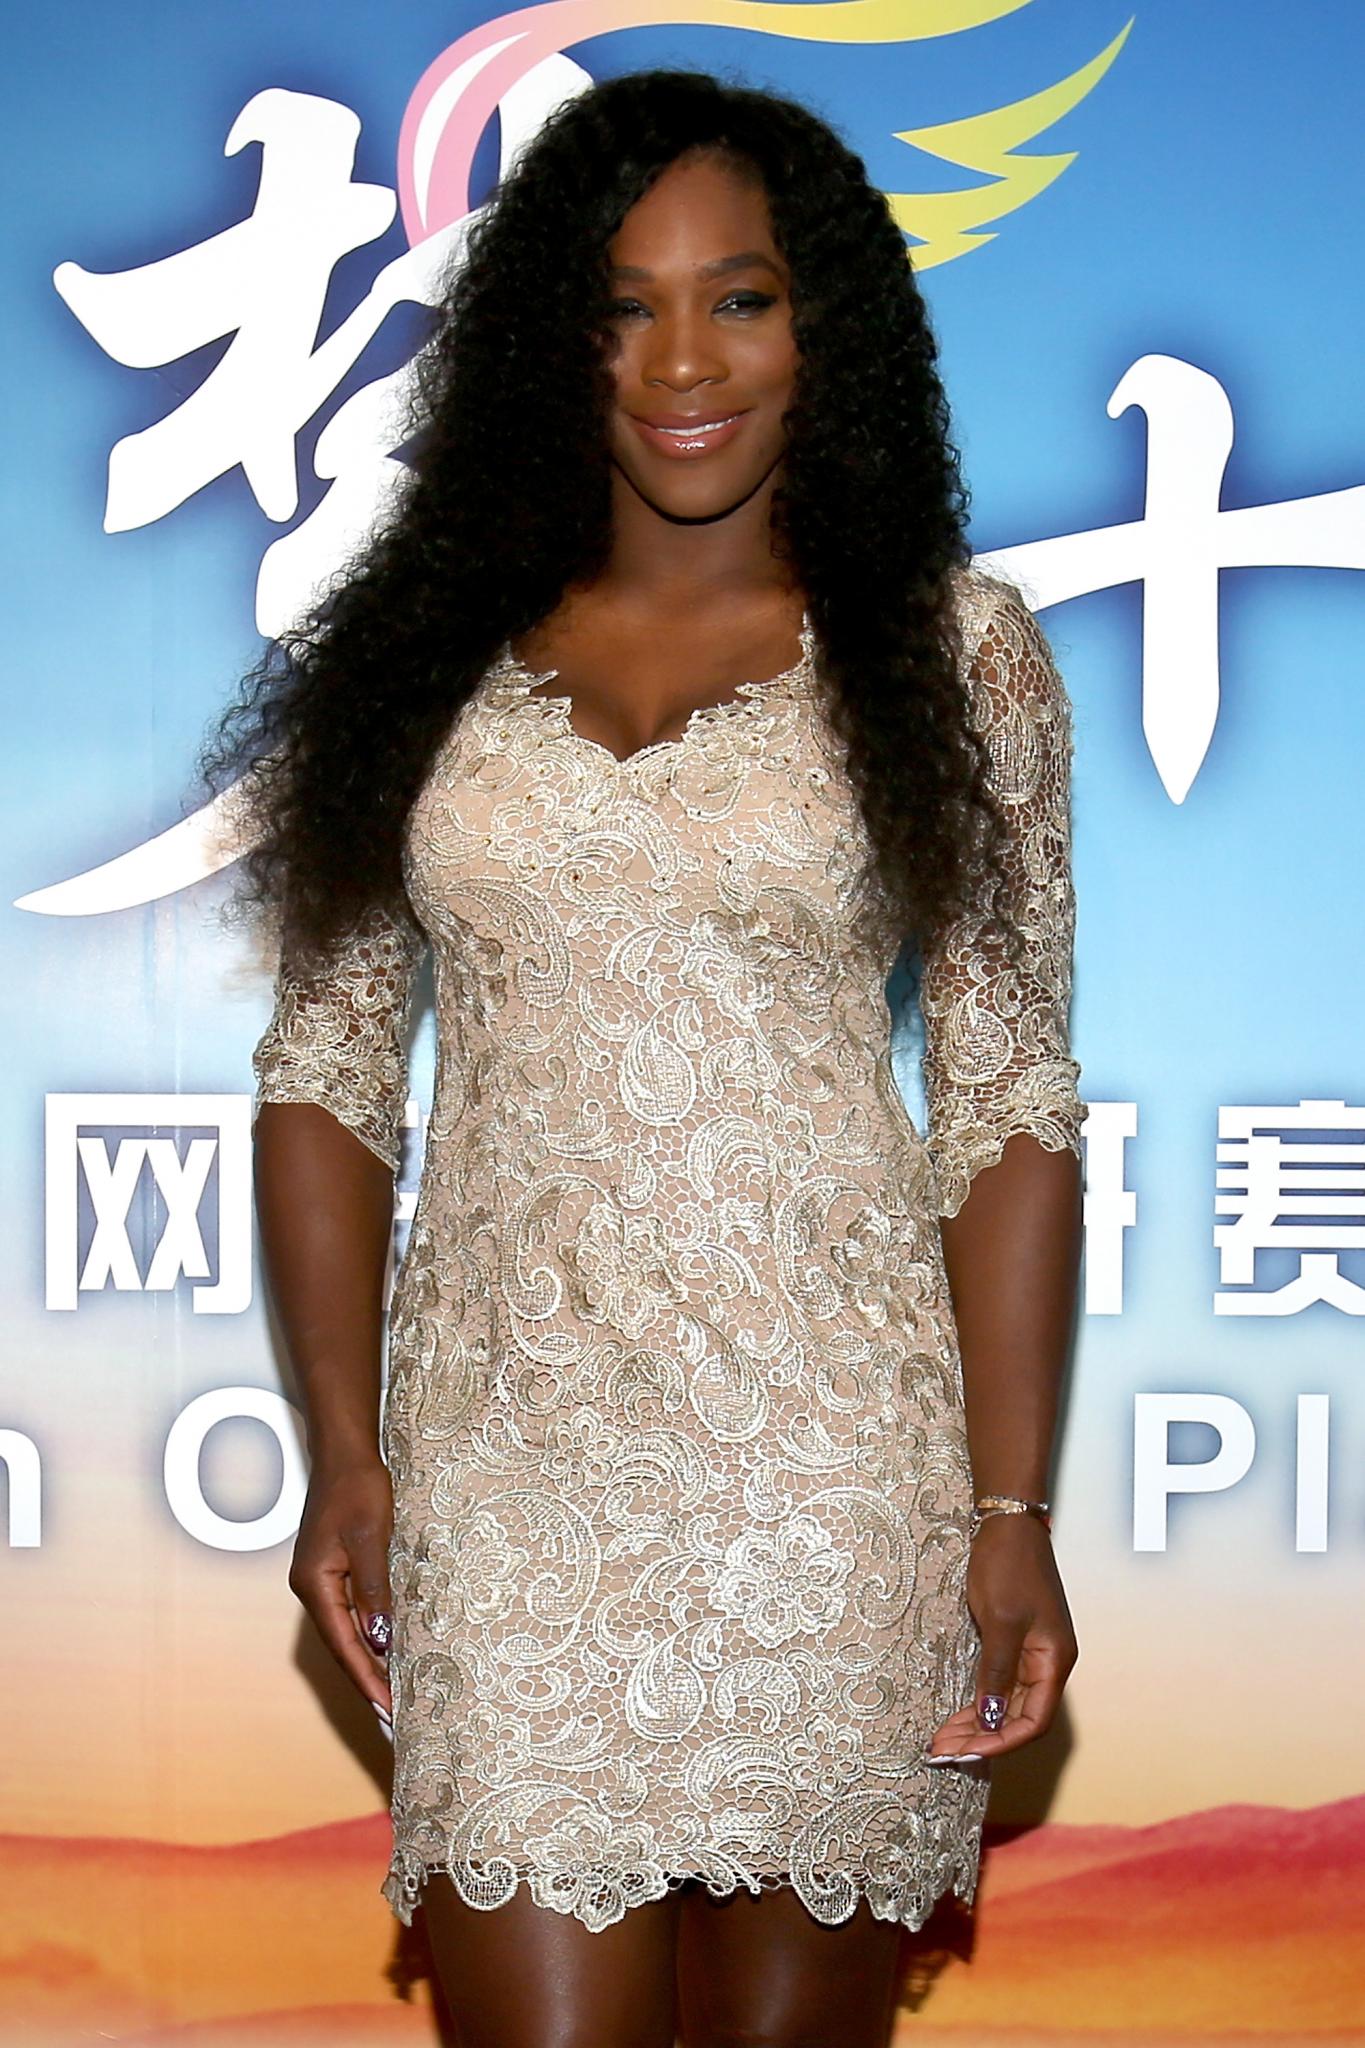 Serena Williams Named AP's Athlete of the Year